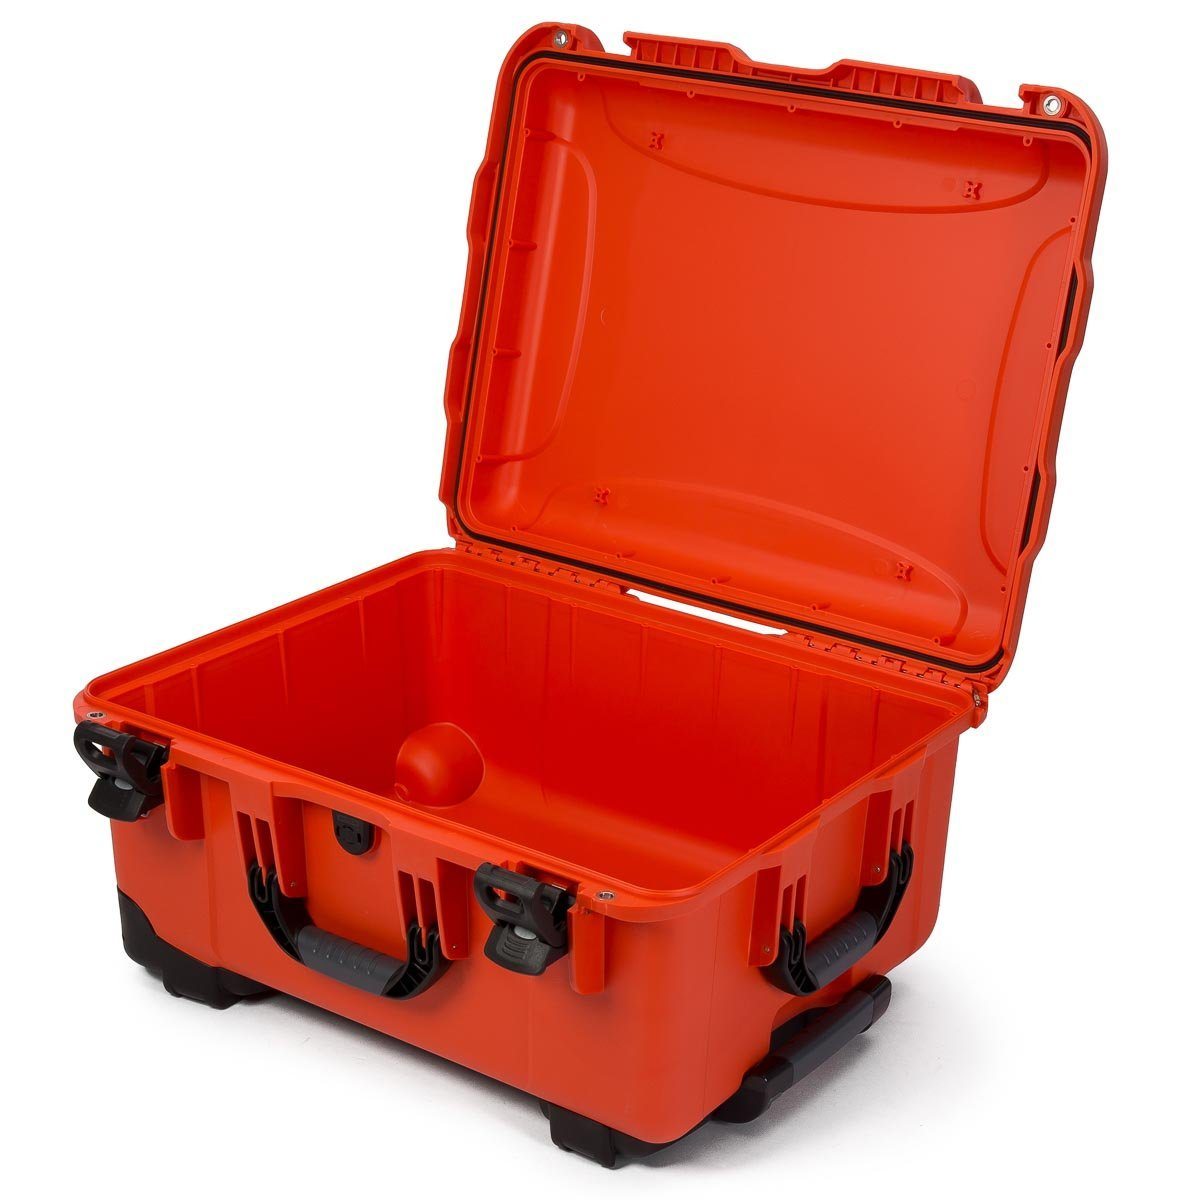 Condition 1#300 22” Large Rolling Lockable Hard Storage Case with Foam,  Waterproof Protective Box for Camera, Tactical, Scientific Gear, 22”x14”x9,  Orange : : Electronics